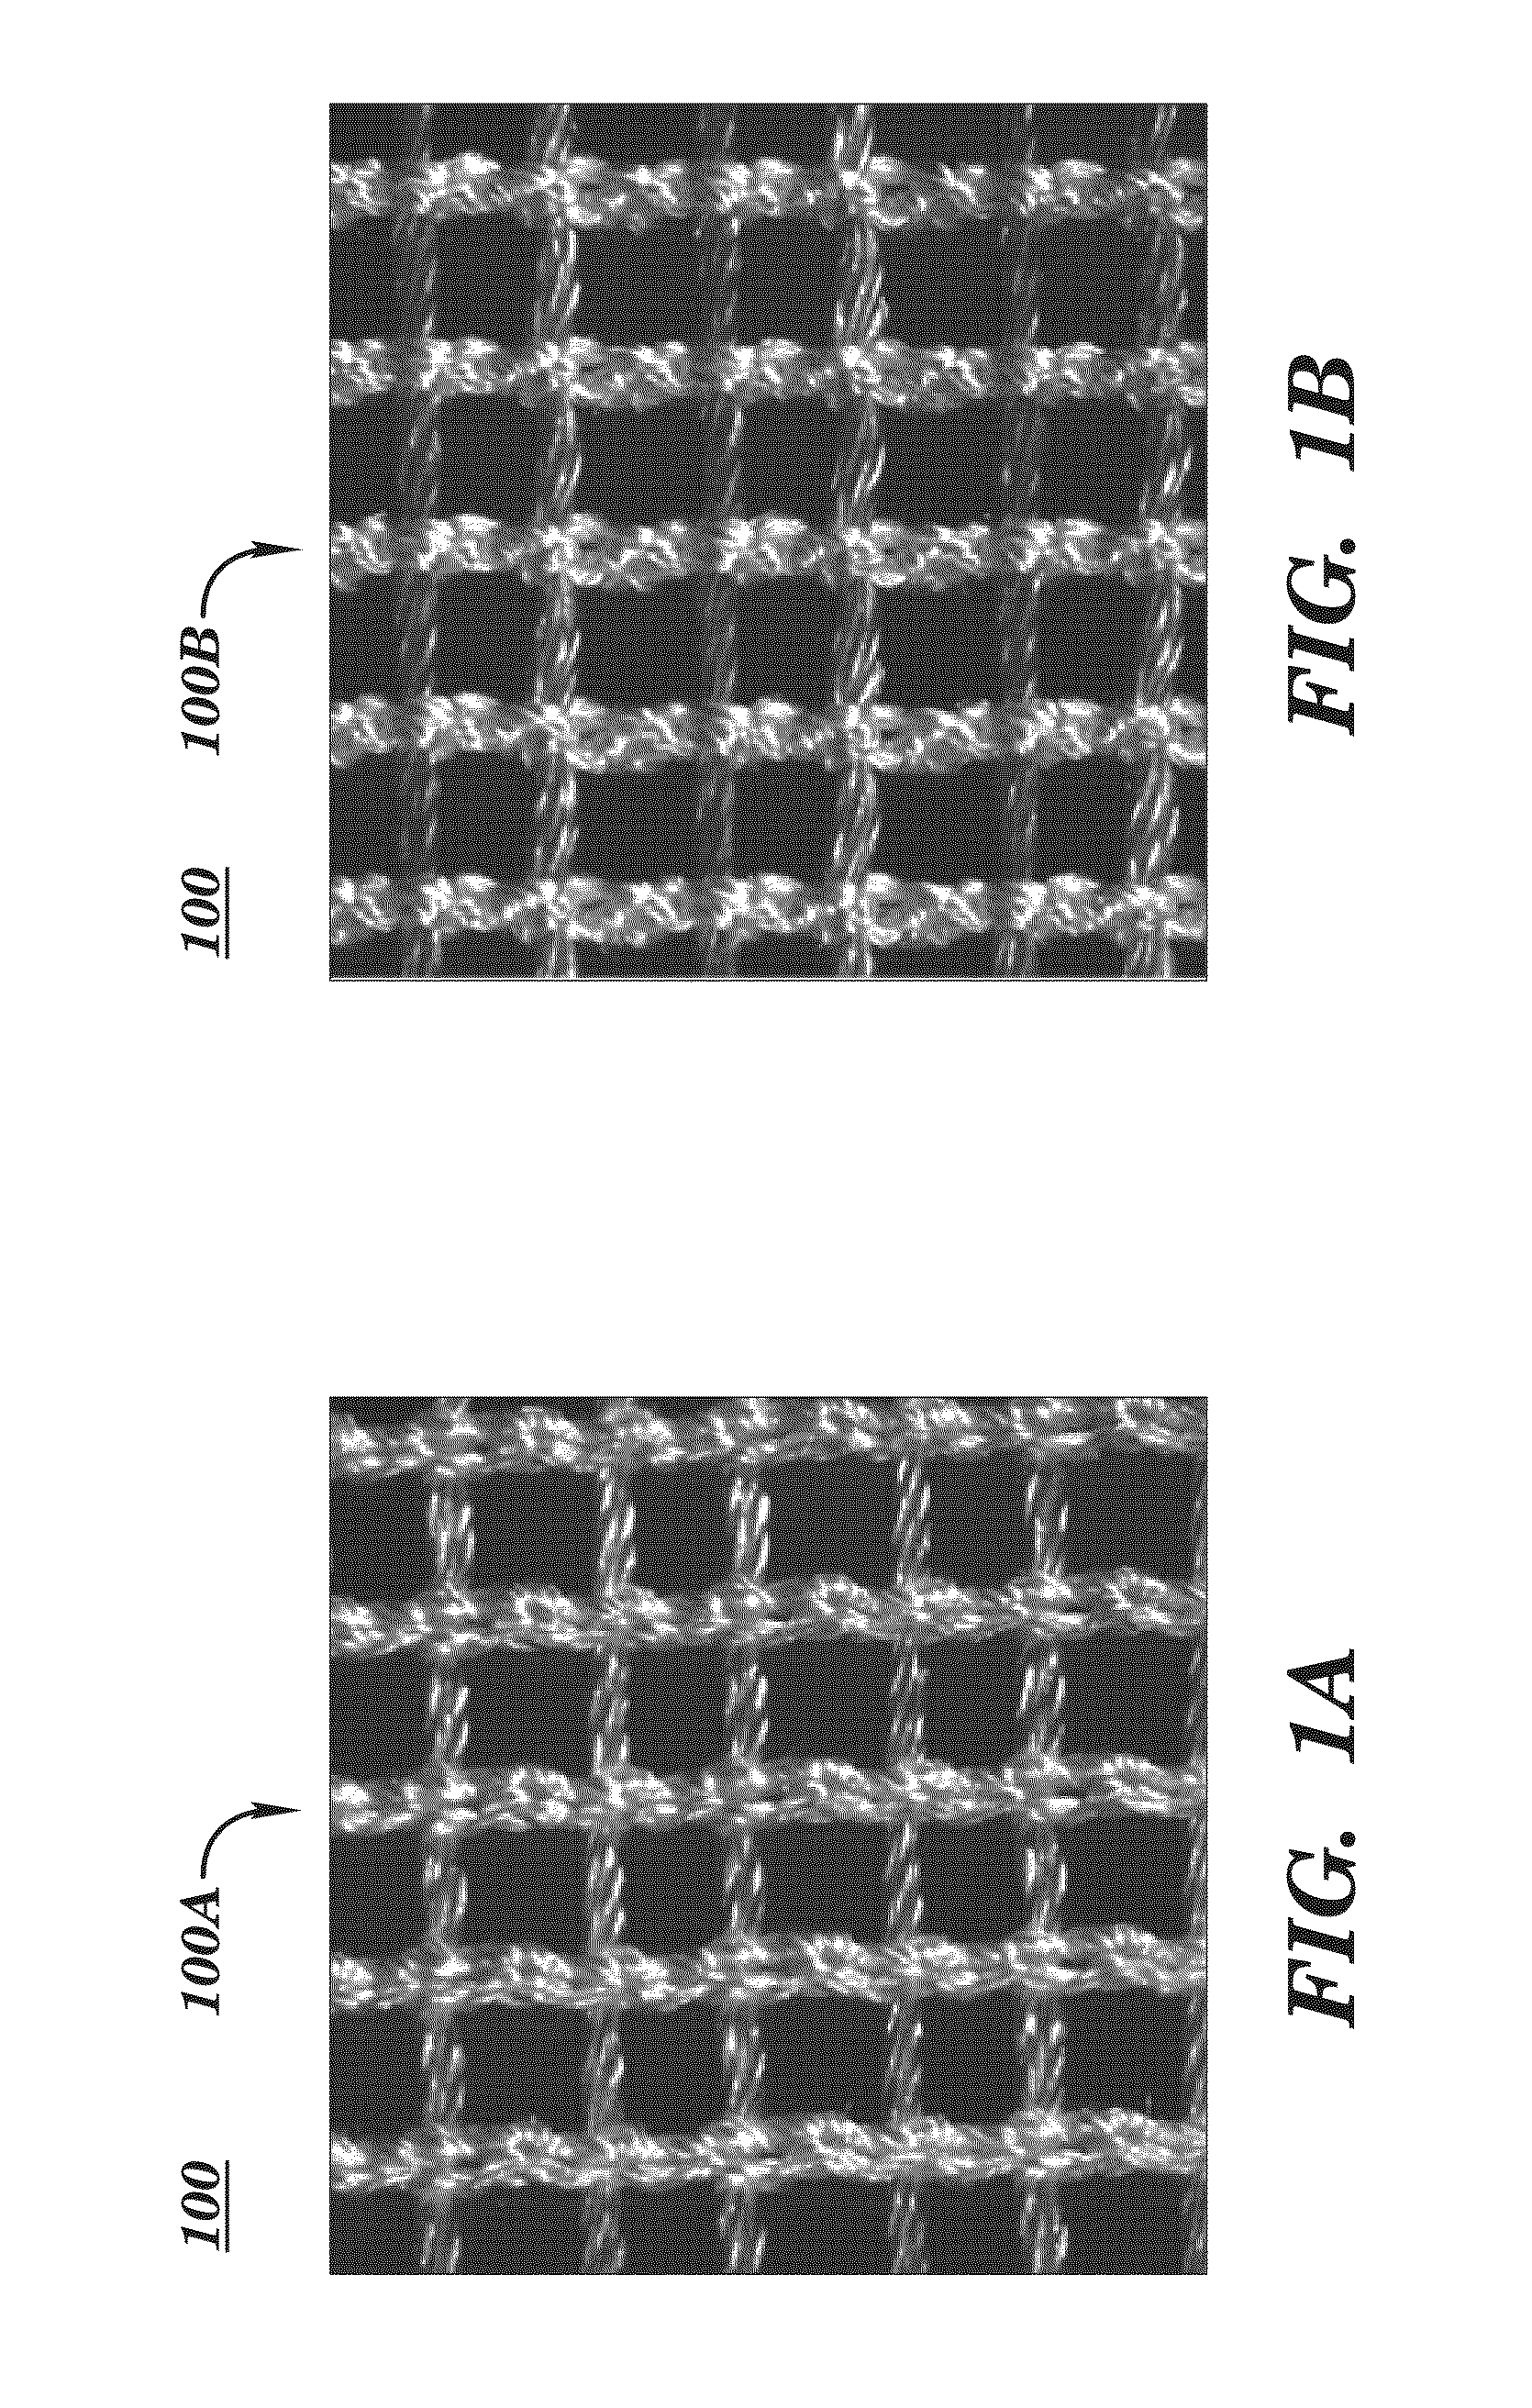 Prosthetic device and method of using in breast augmentation and/or breast reconstruction